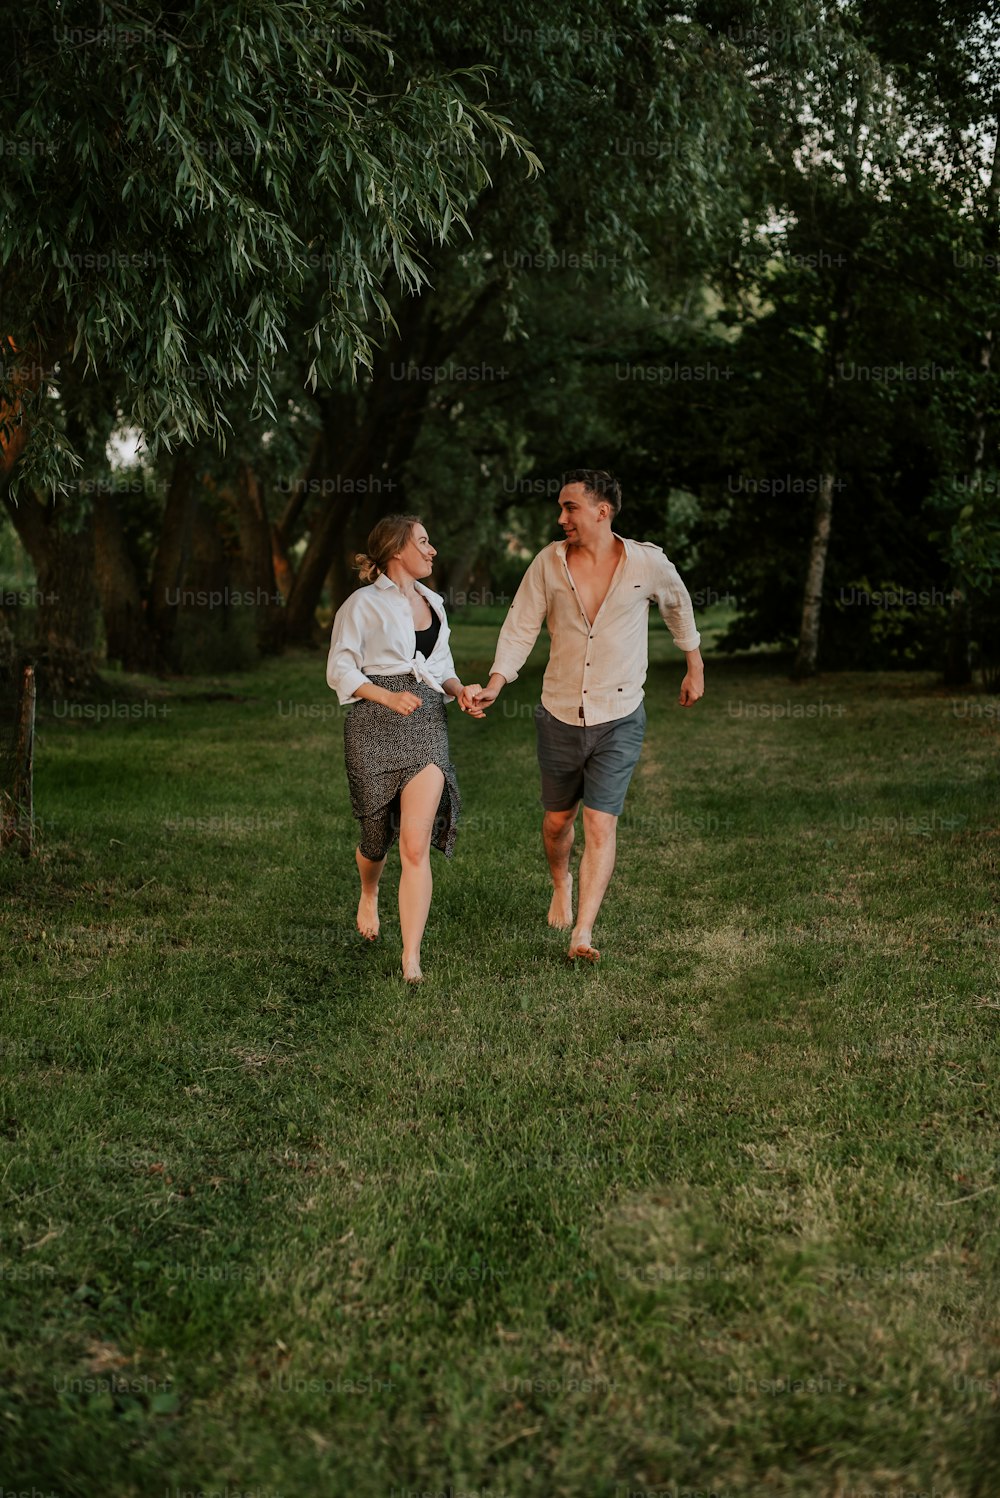 a man and woman walking through a field holding hands